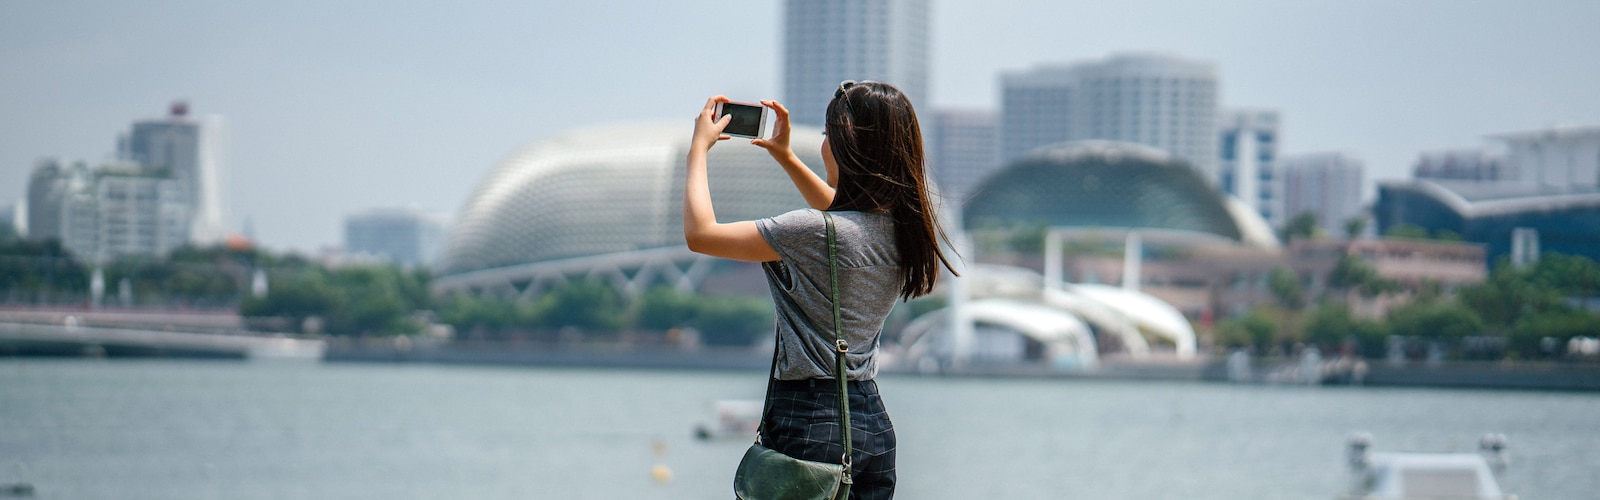 A woman taking a photo over a city view with an iphone